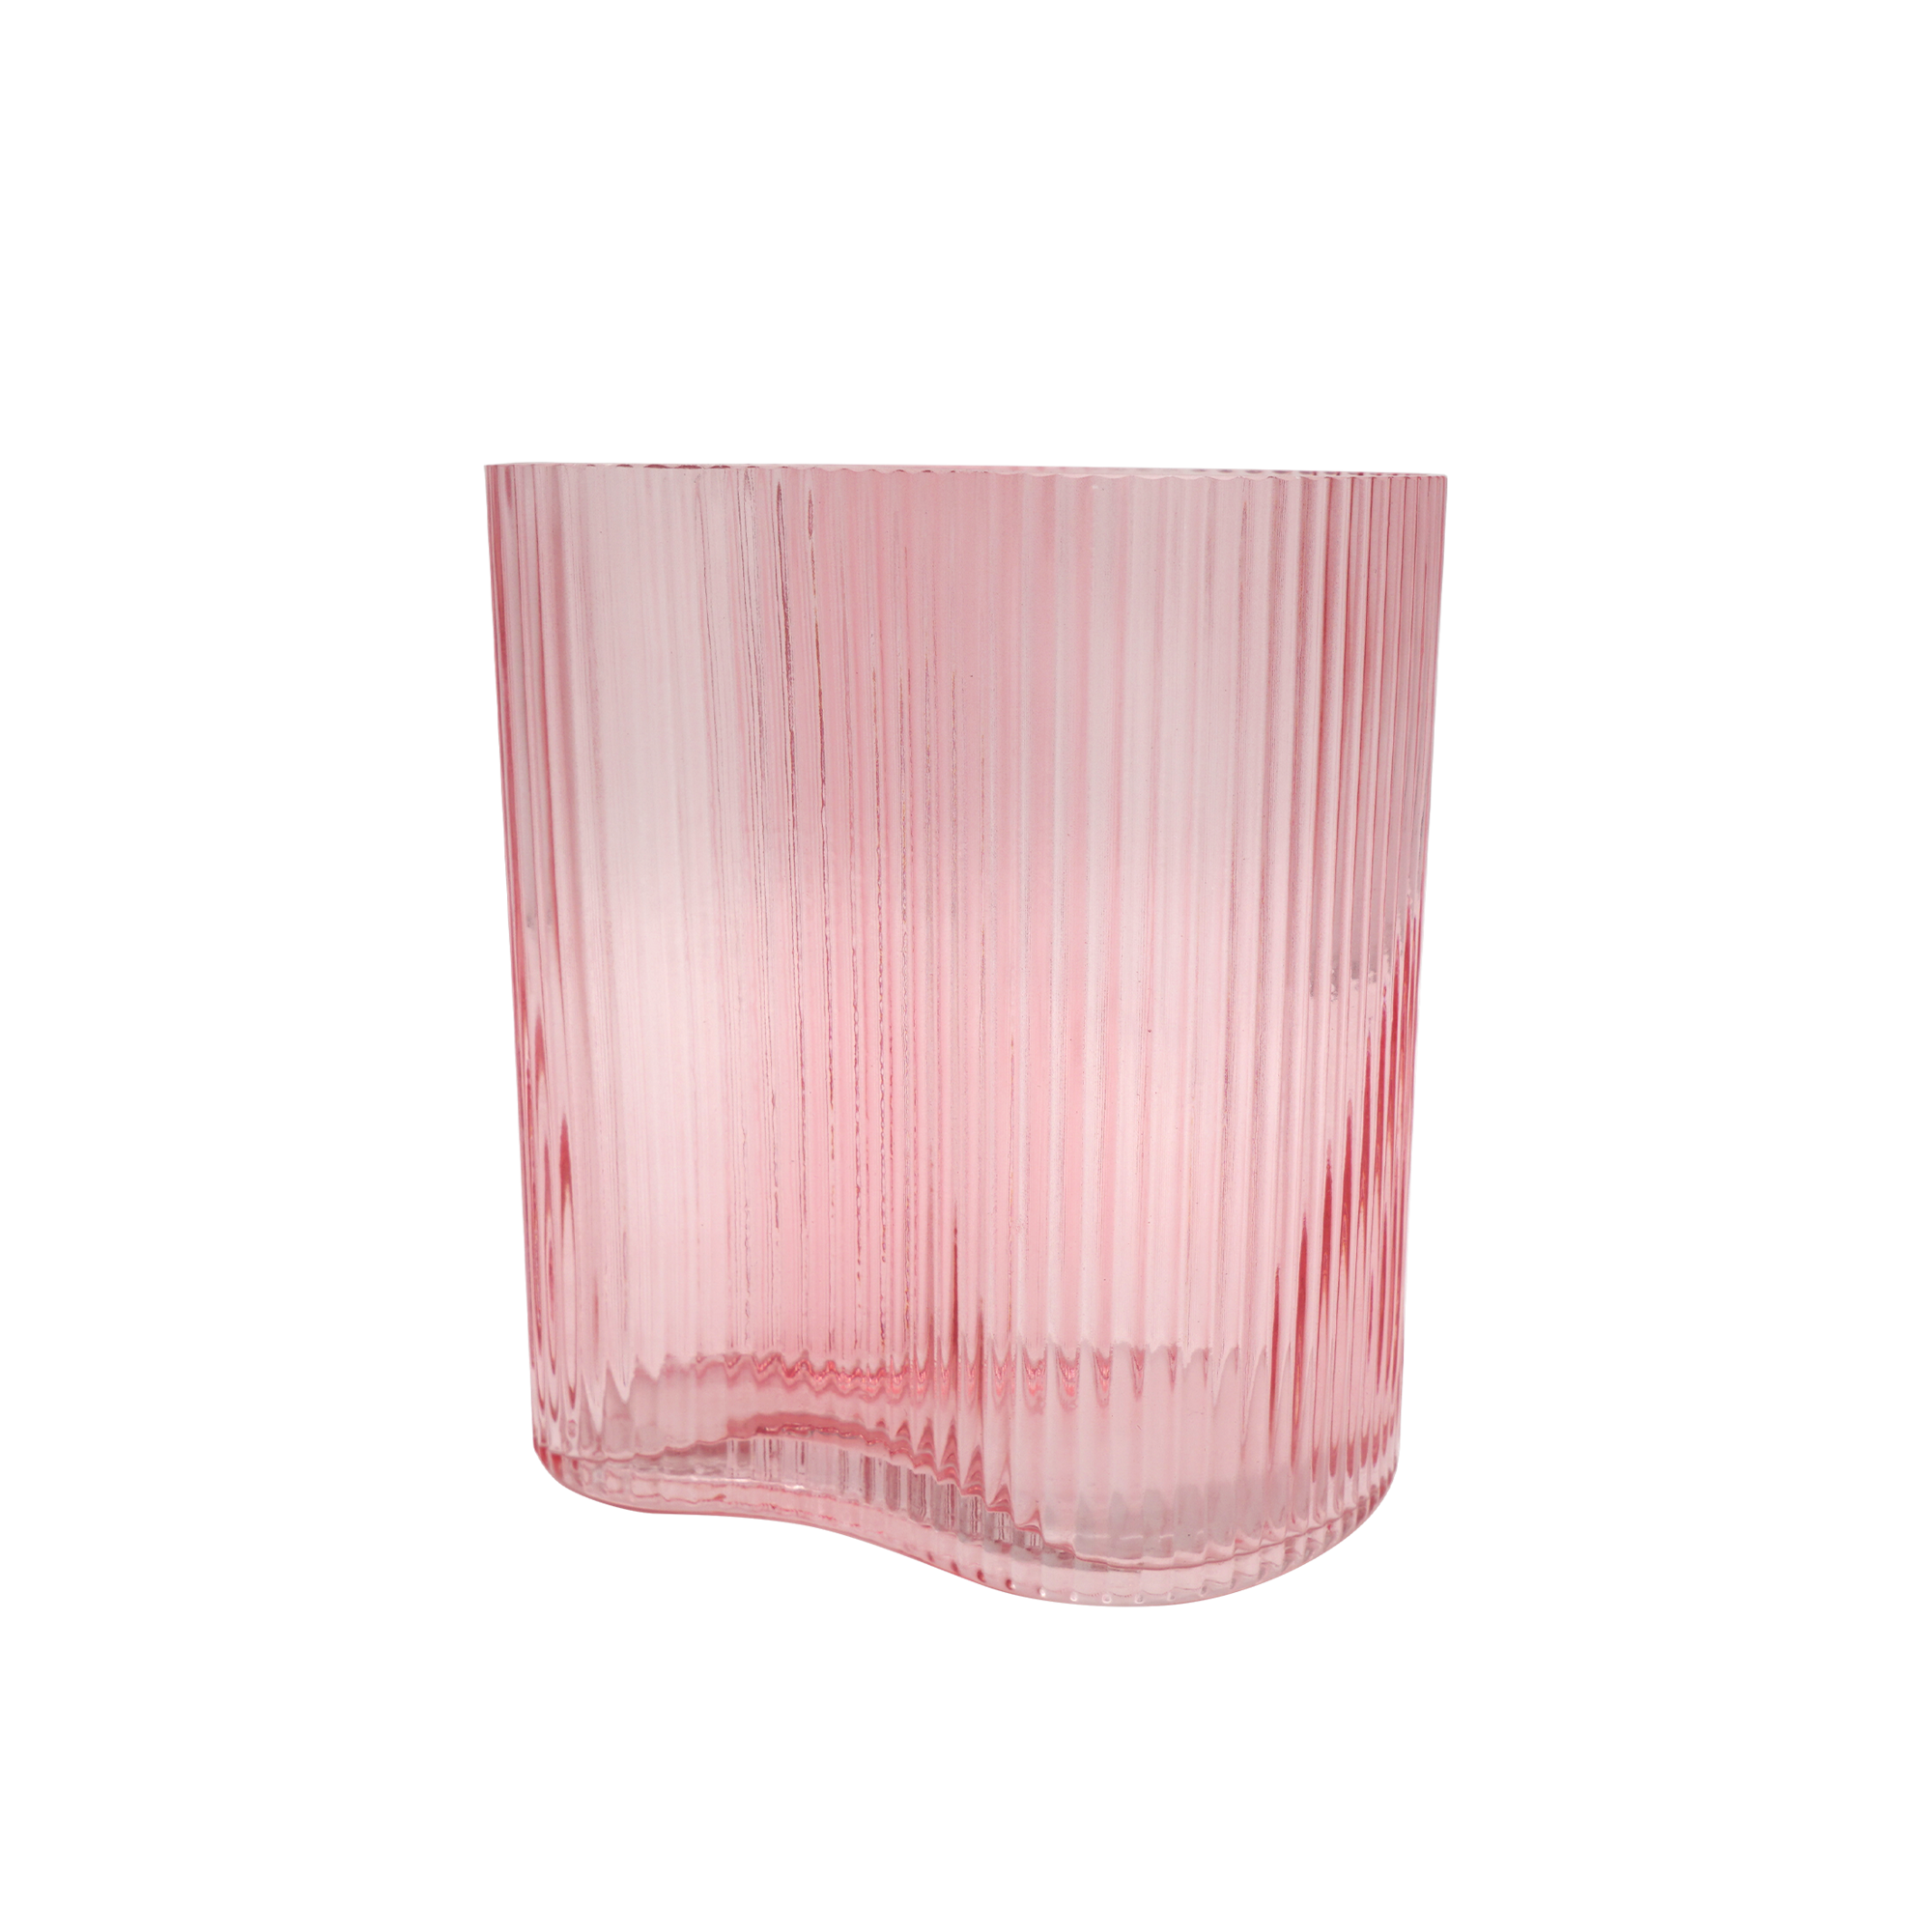 Suzhou Curved Vase Small Pink